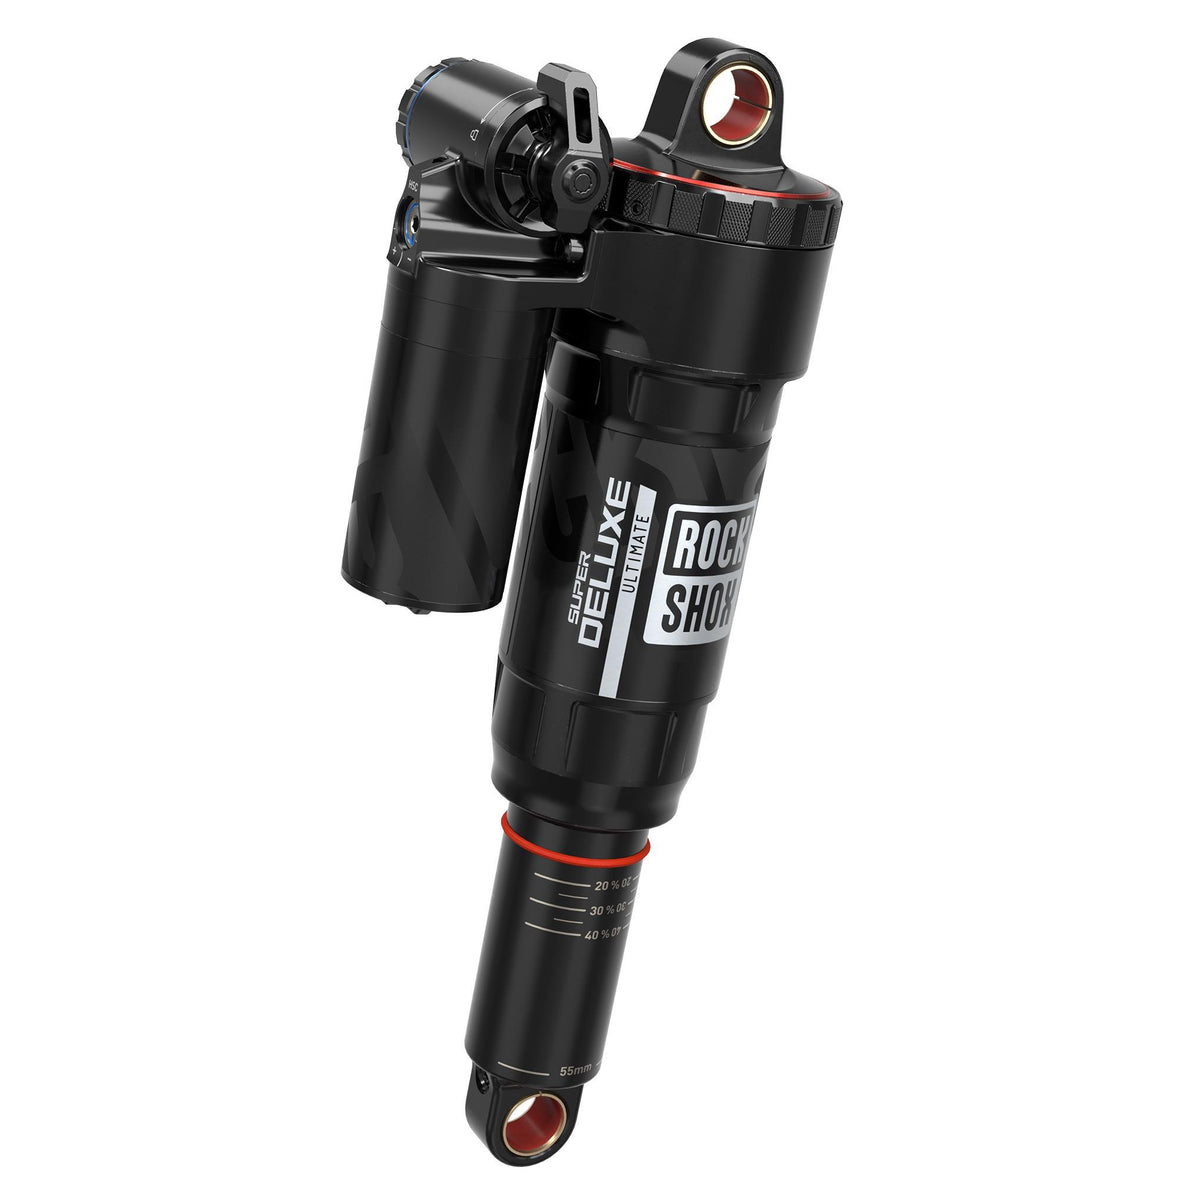 Rockshox Super Deluxe Ultimate Rear Shock RC2T - Linear Air, 0Neg/3Pos Tokens, Linearreb/Lccomp, 320LB Lockout, Hydraulic Bottom Out, Standard Standard(8X20)C1 Specialized Levo2020-2021 Black 210X52.5